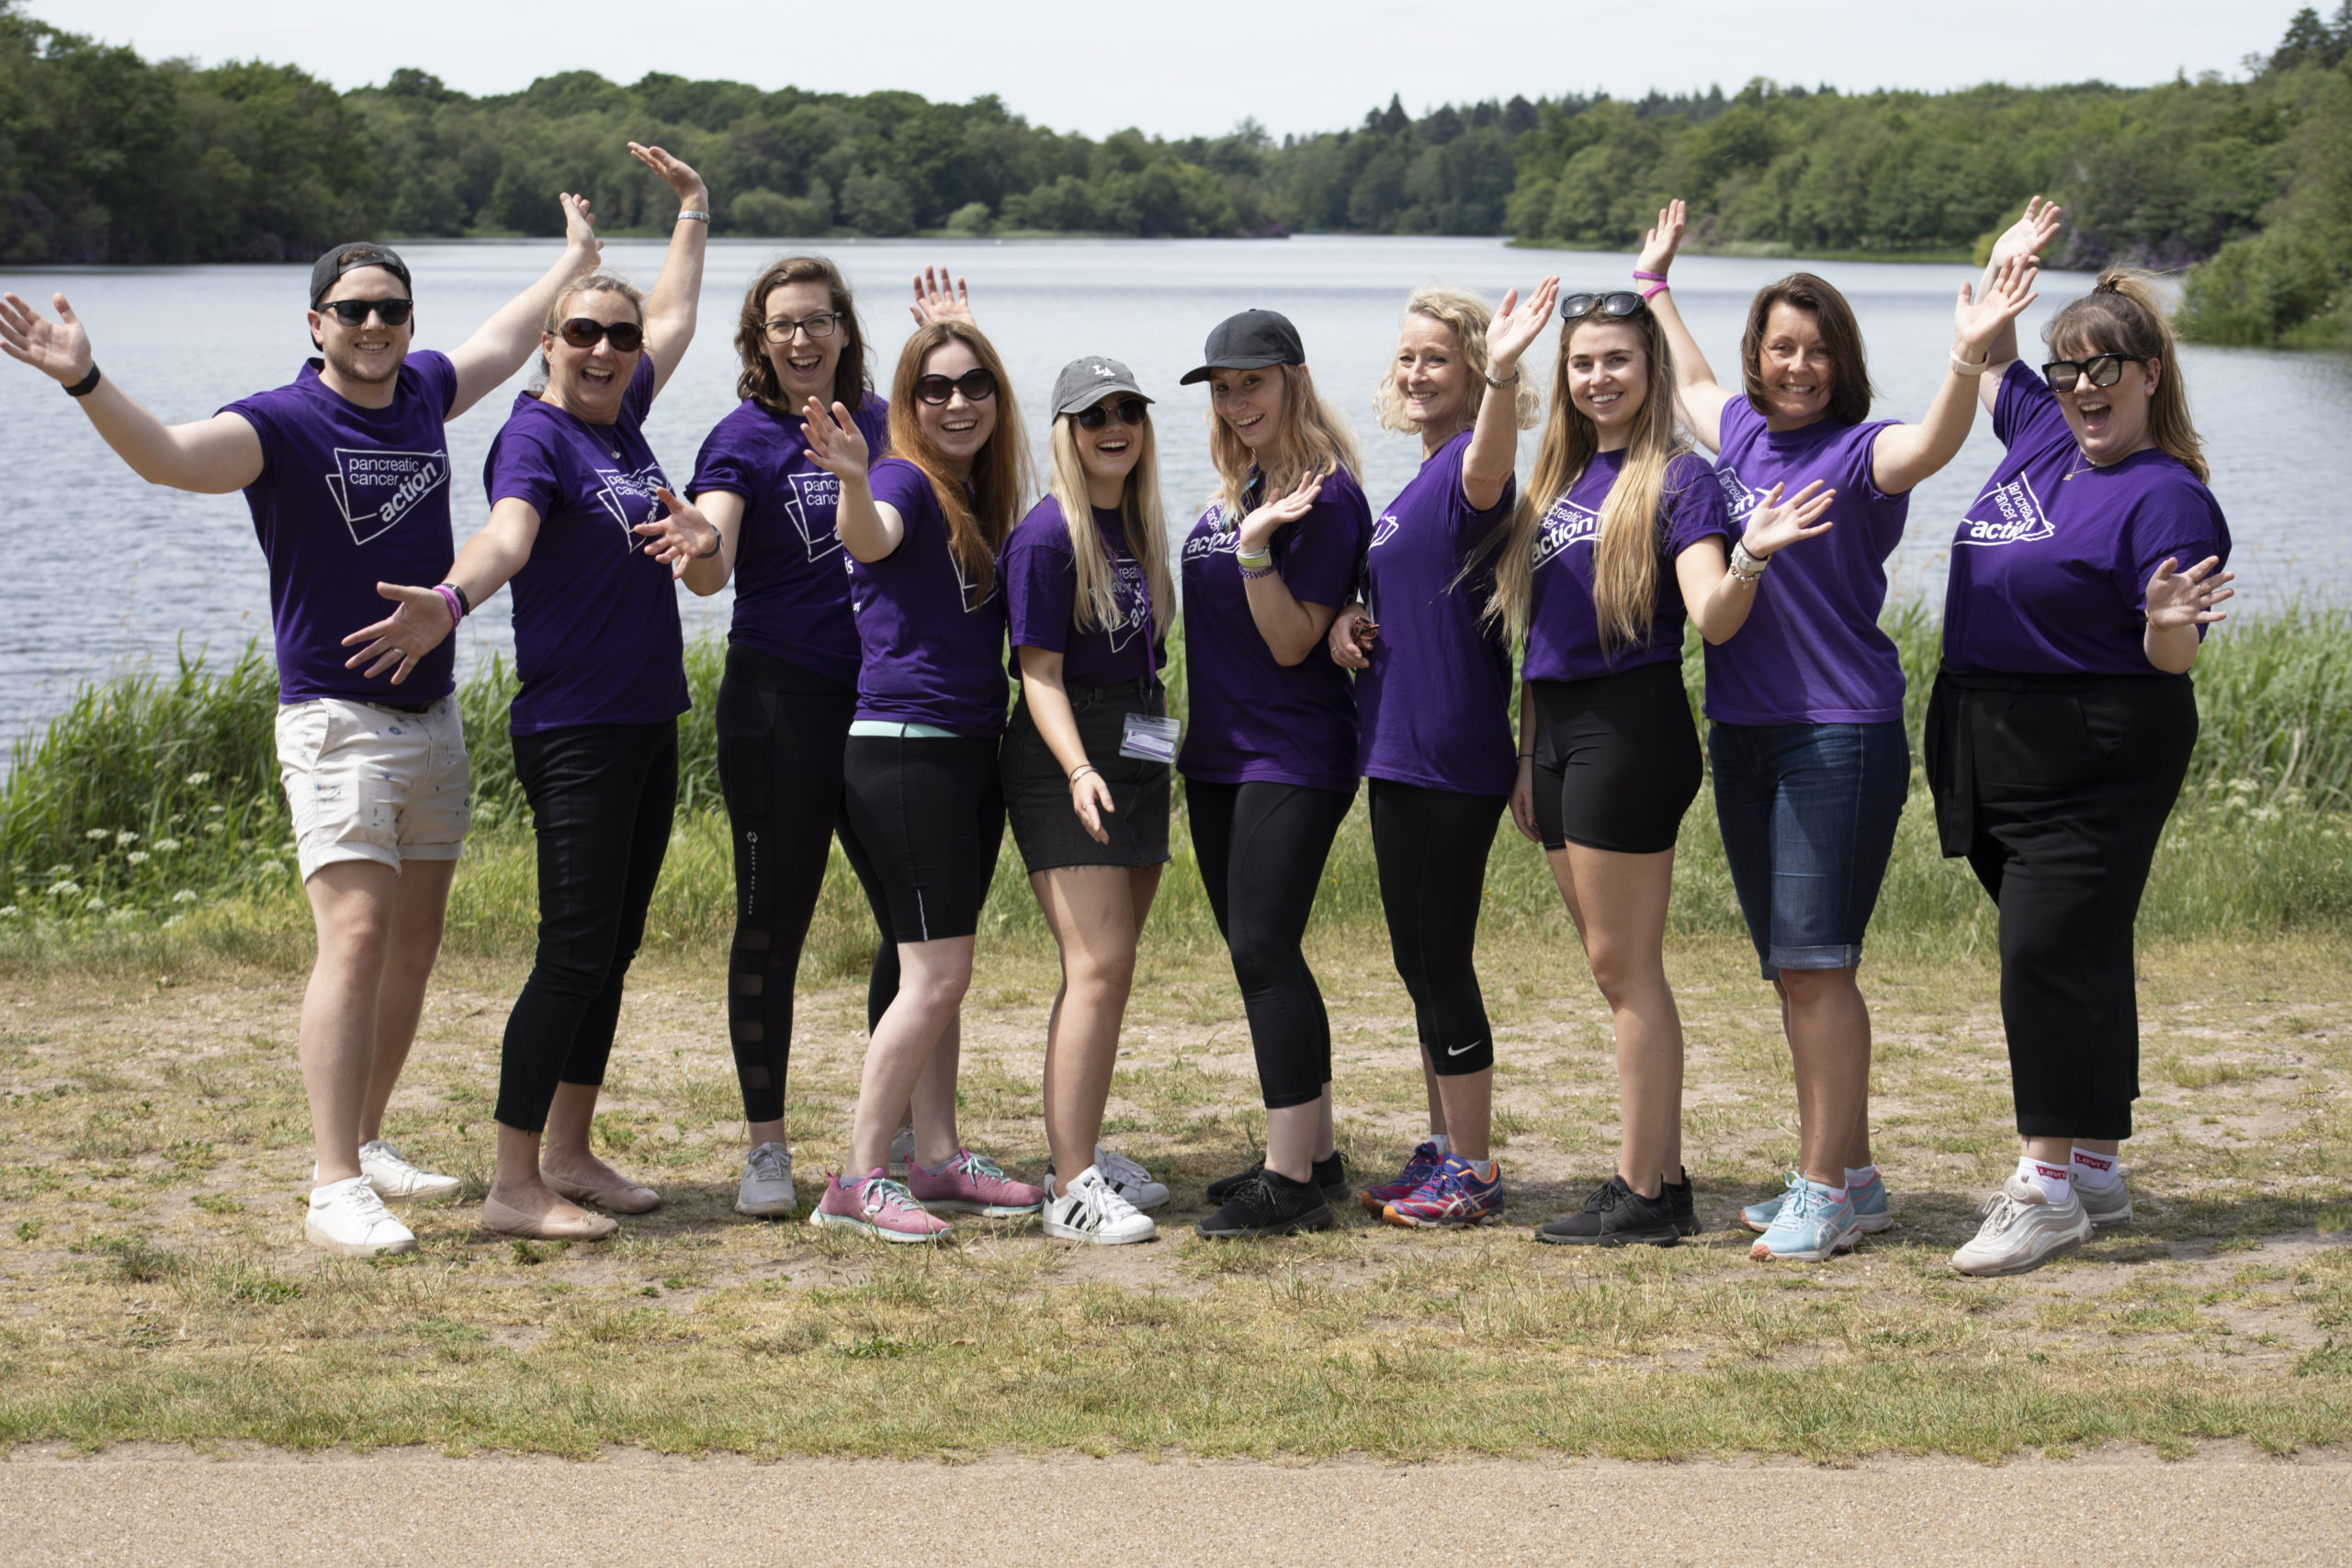 Pancreatic Cancer Action team